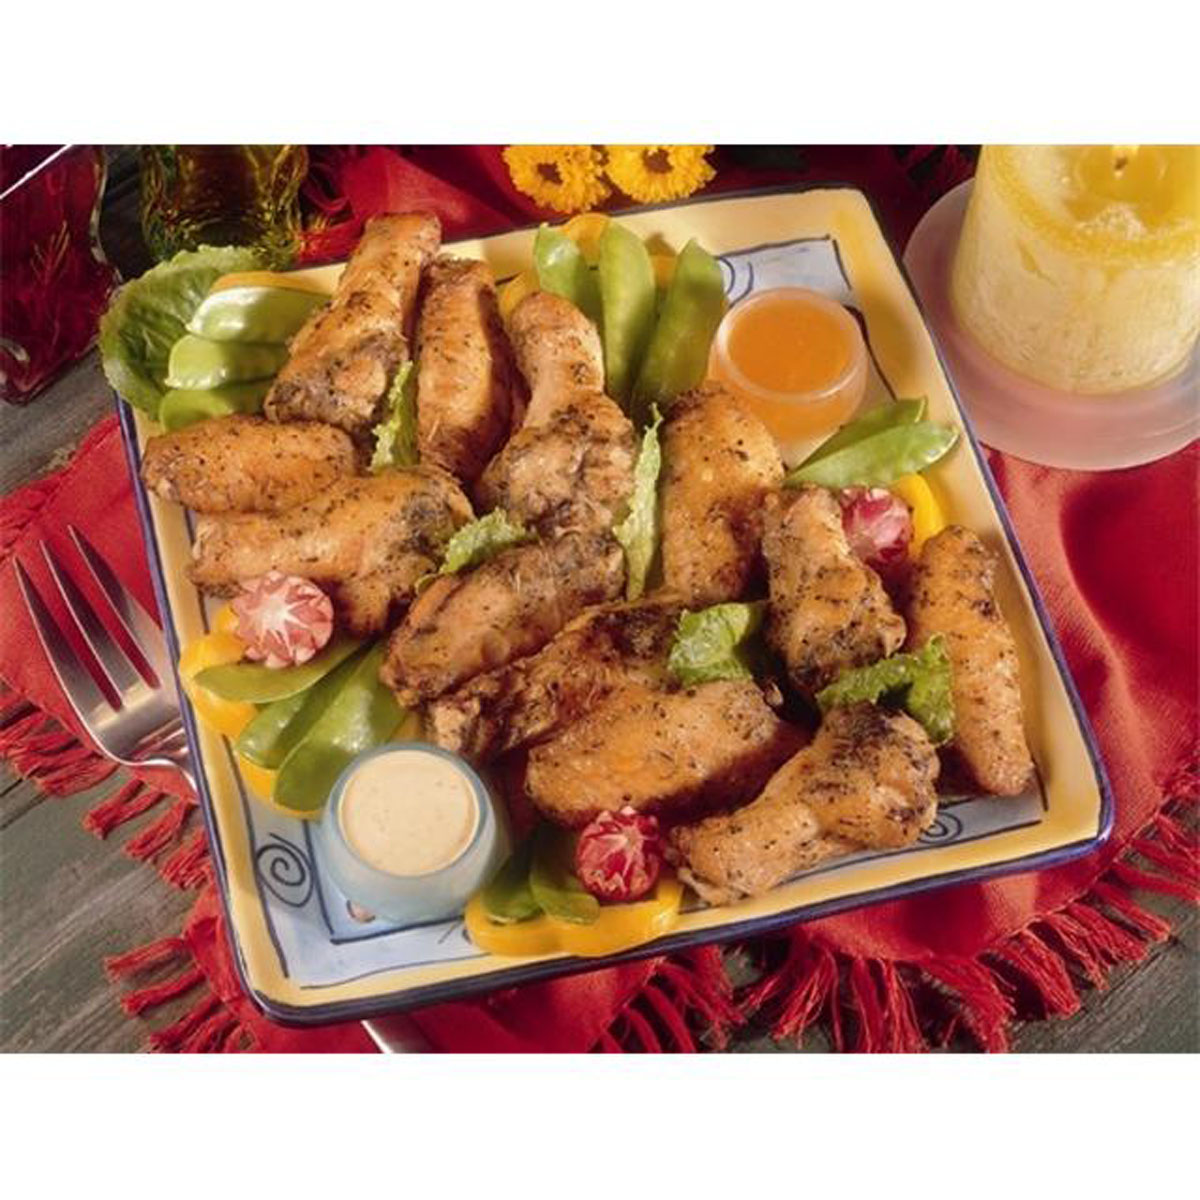 SHENANDOAH® KICK 'N WINGS®, Fully Cooked, Hot and Spicy, 1st and 2nd Sections, Medium, Frozen<br/>(38001)